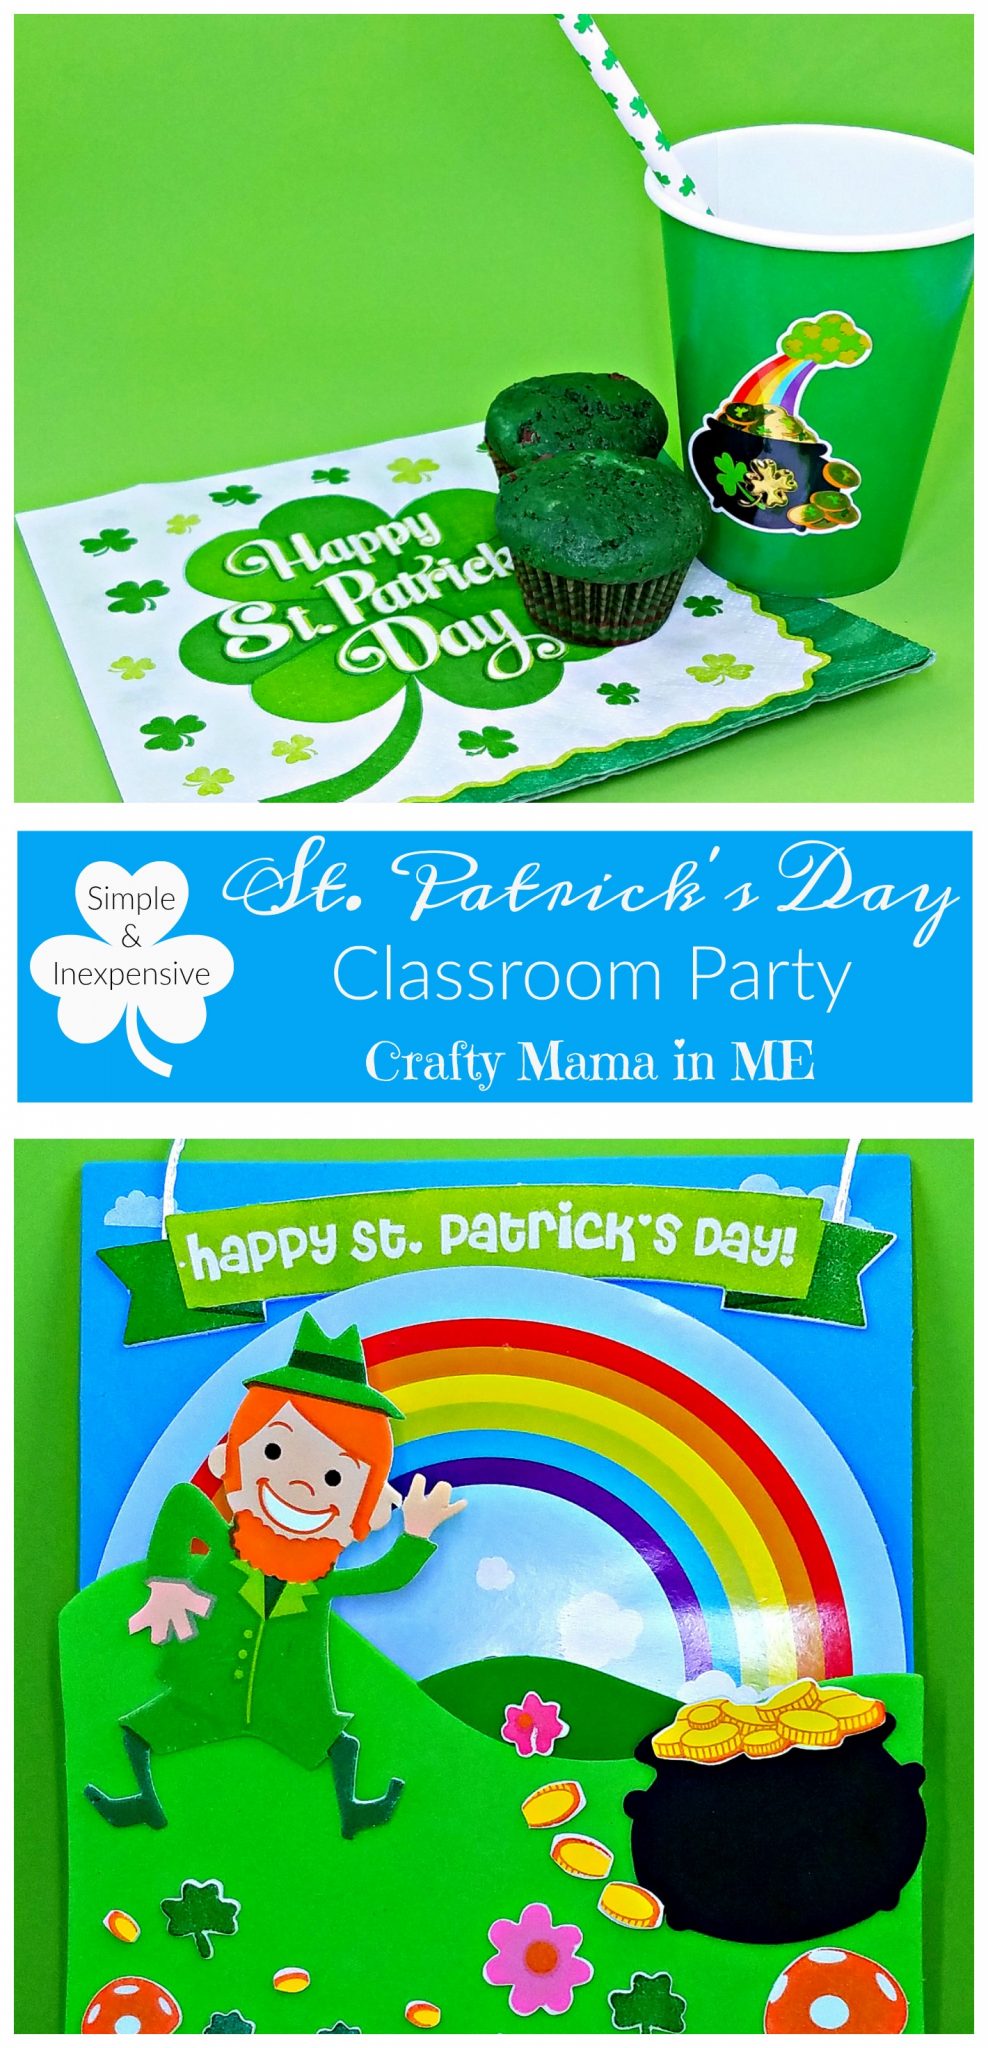 Simple & Inexpensive St. Patrick's Day Classroom Party